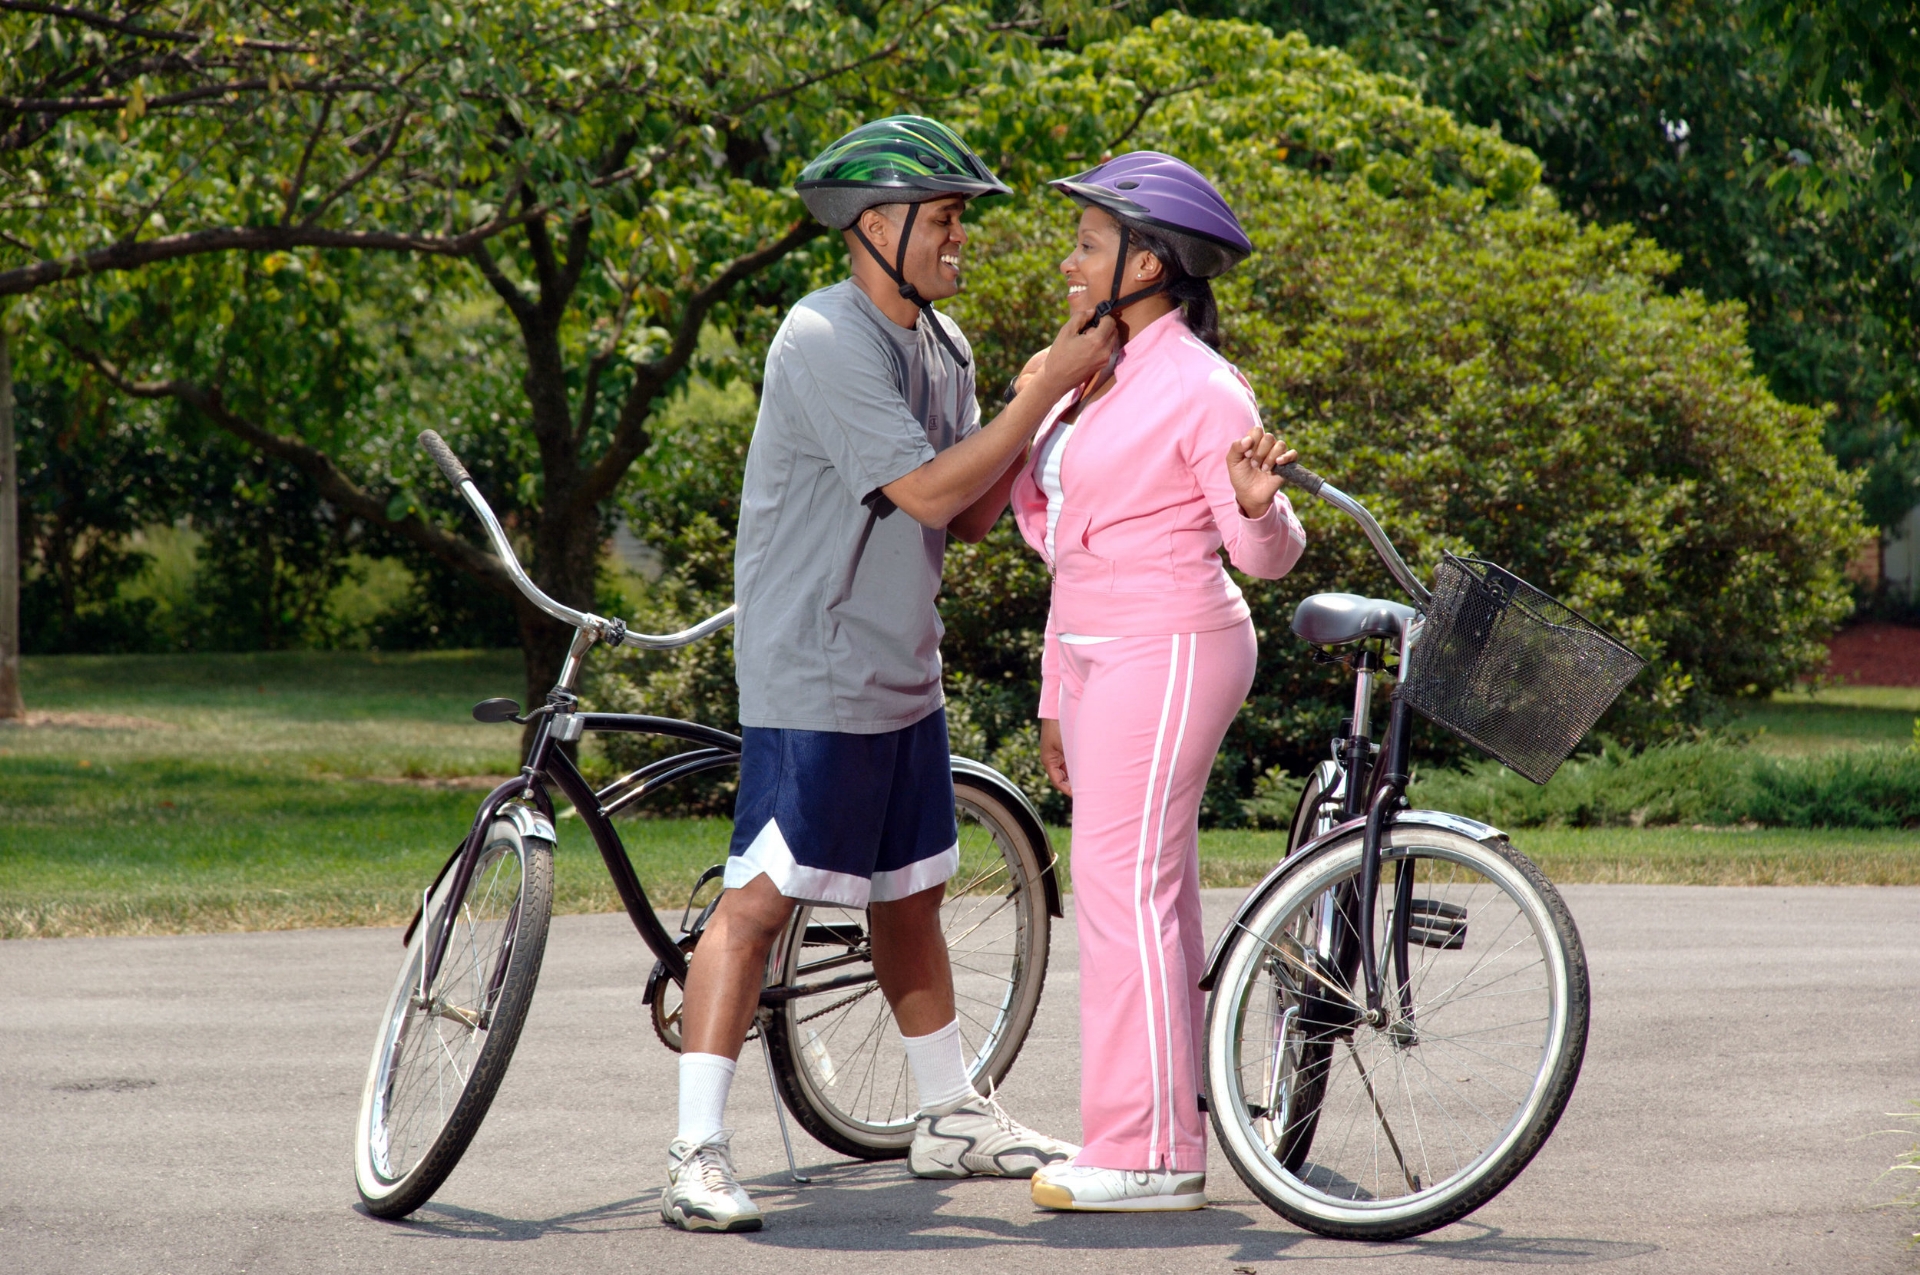 fam_17049-an-african-american-couple-preparing-to-ride-bikes-or.jpg